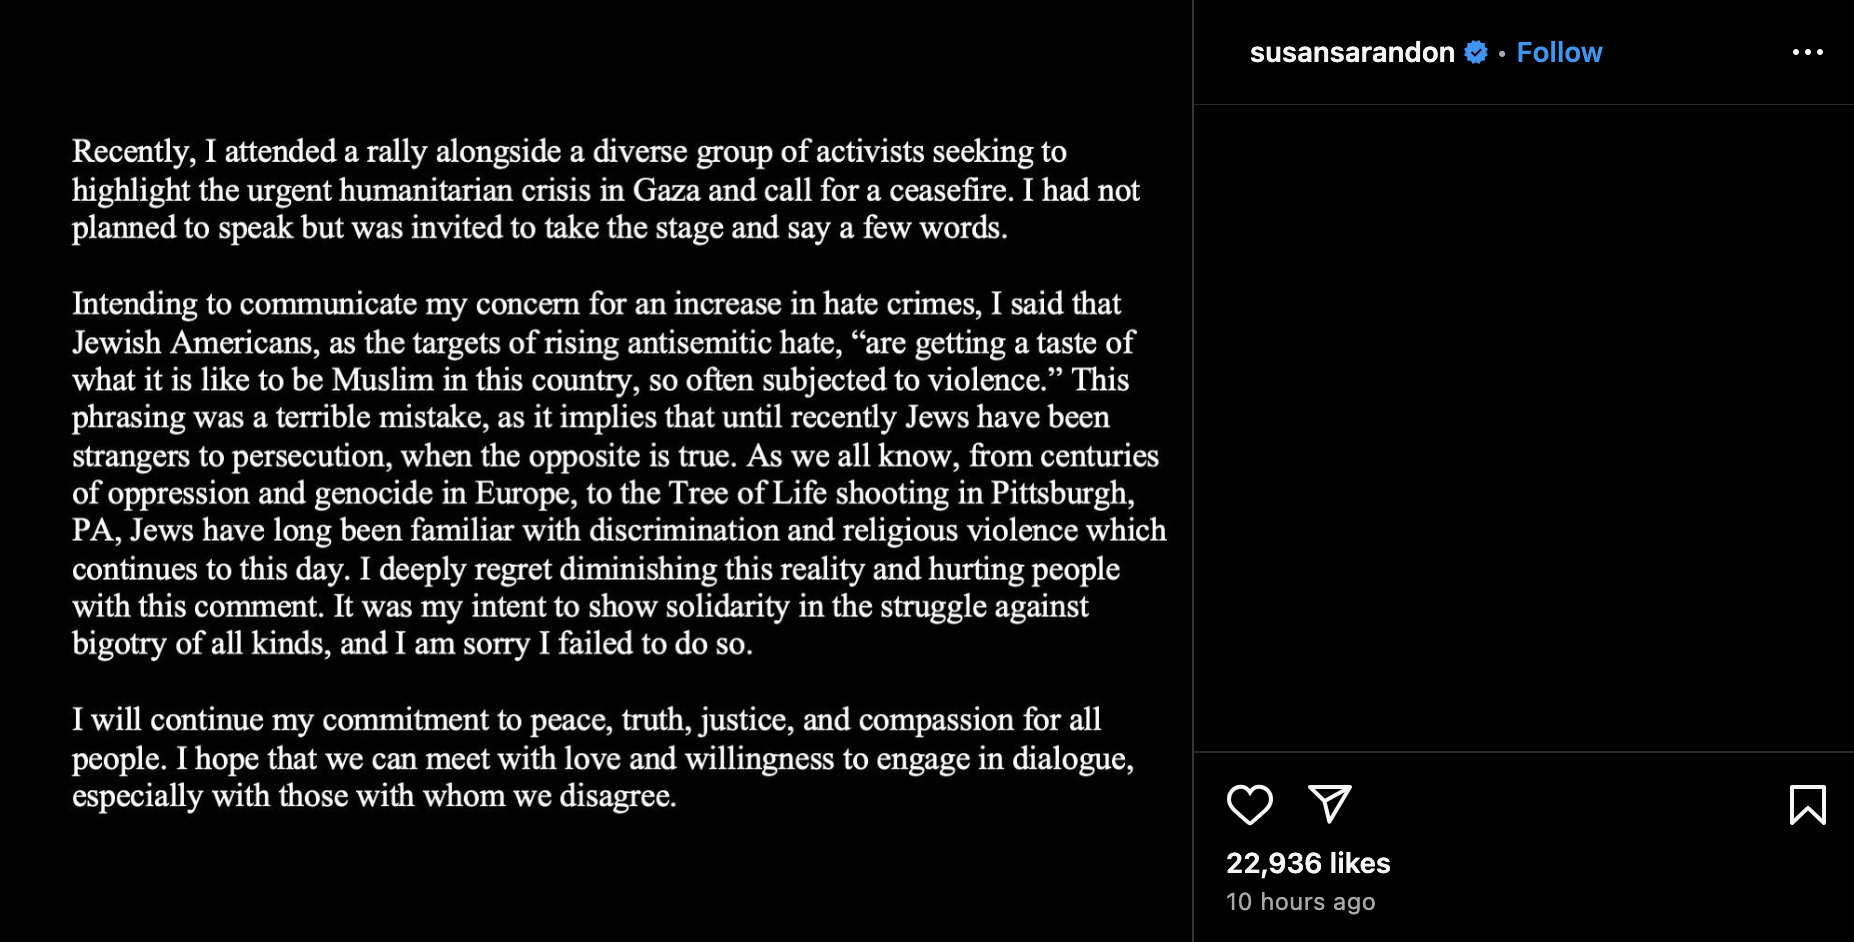 susan sarandon, palestine, hamas, israel, susan sarandon apologises for pro-palestine rally comment after being dropped by agency